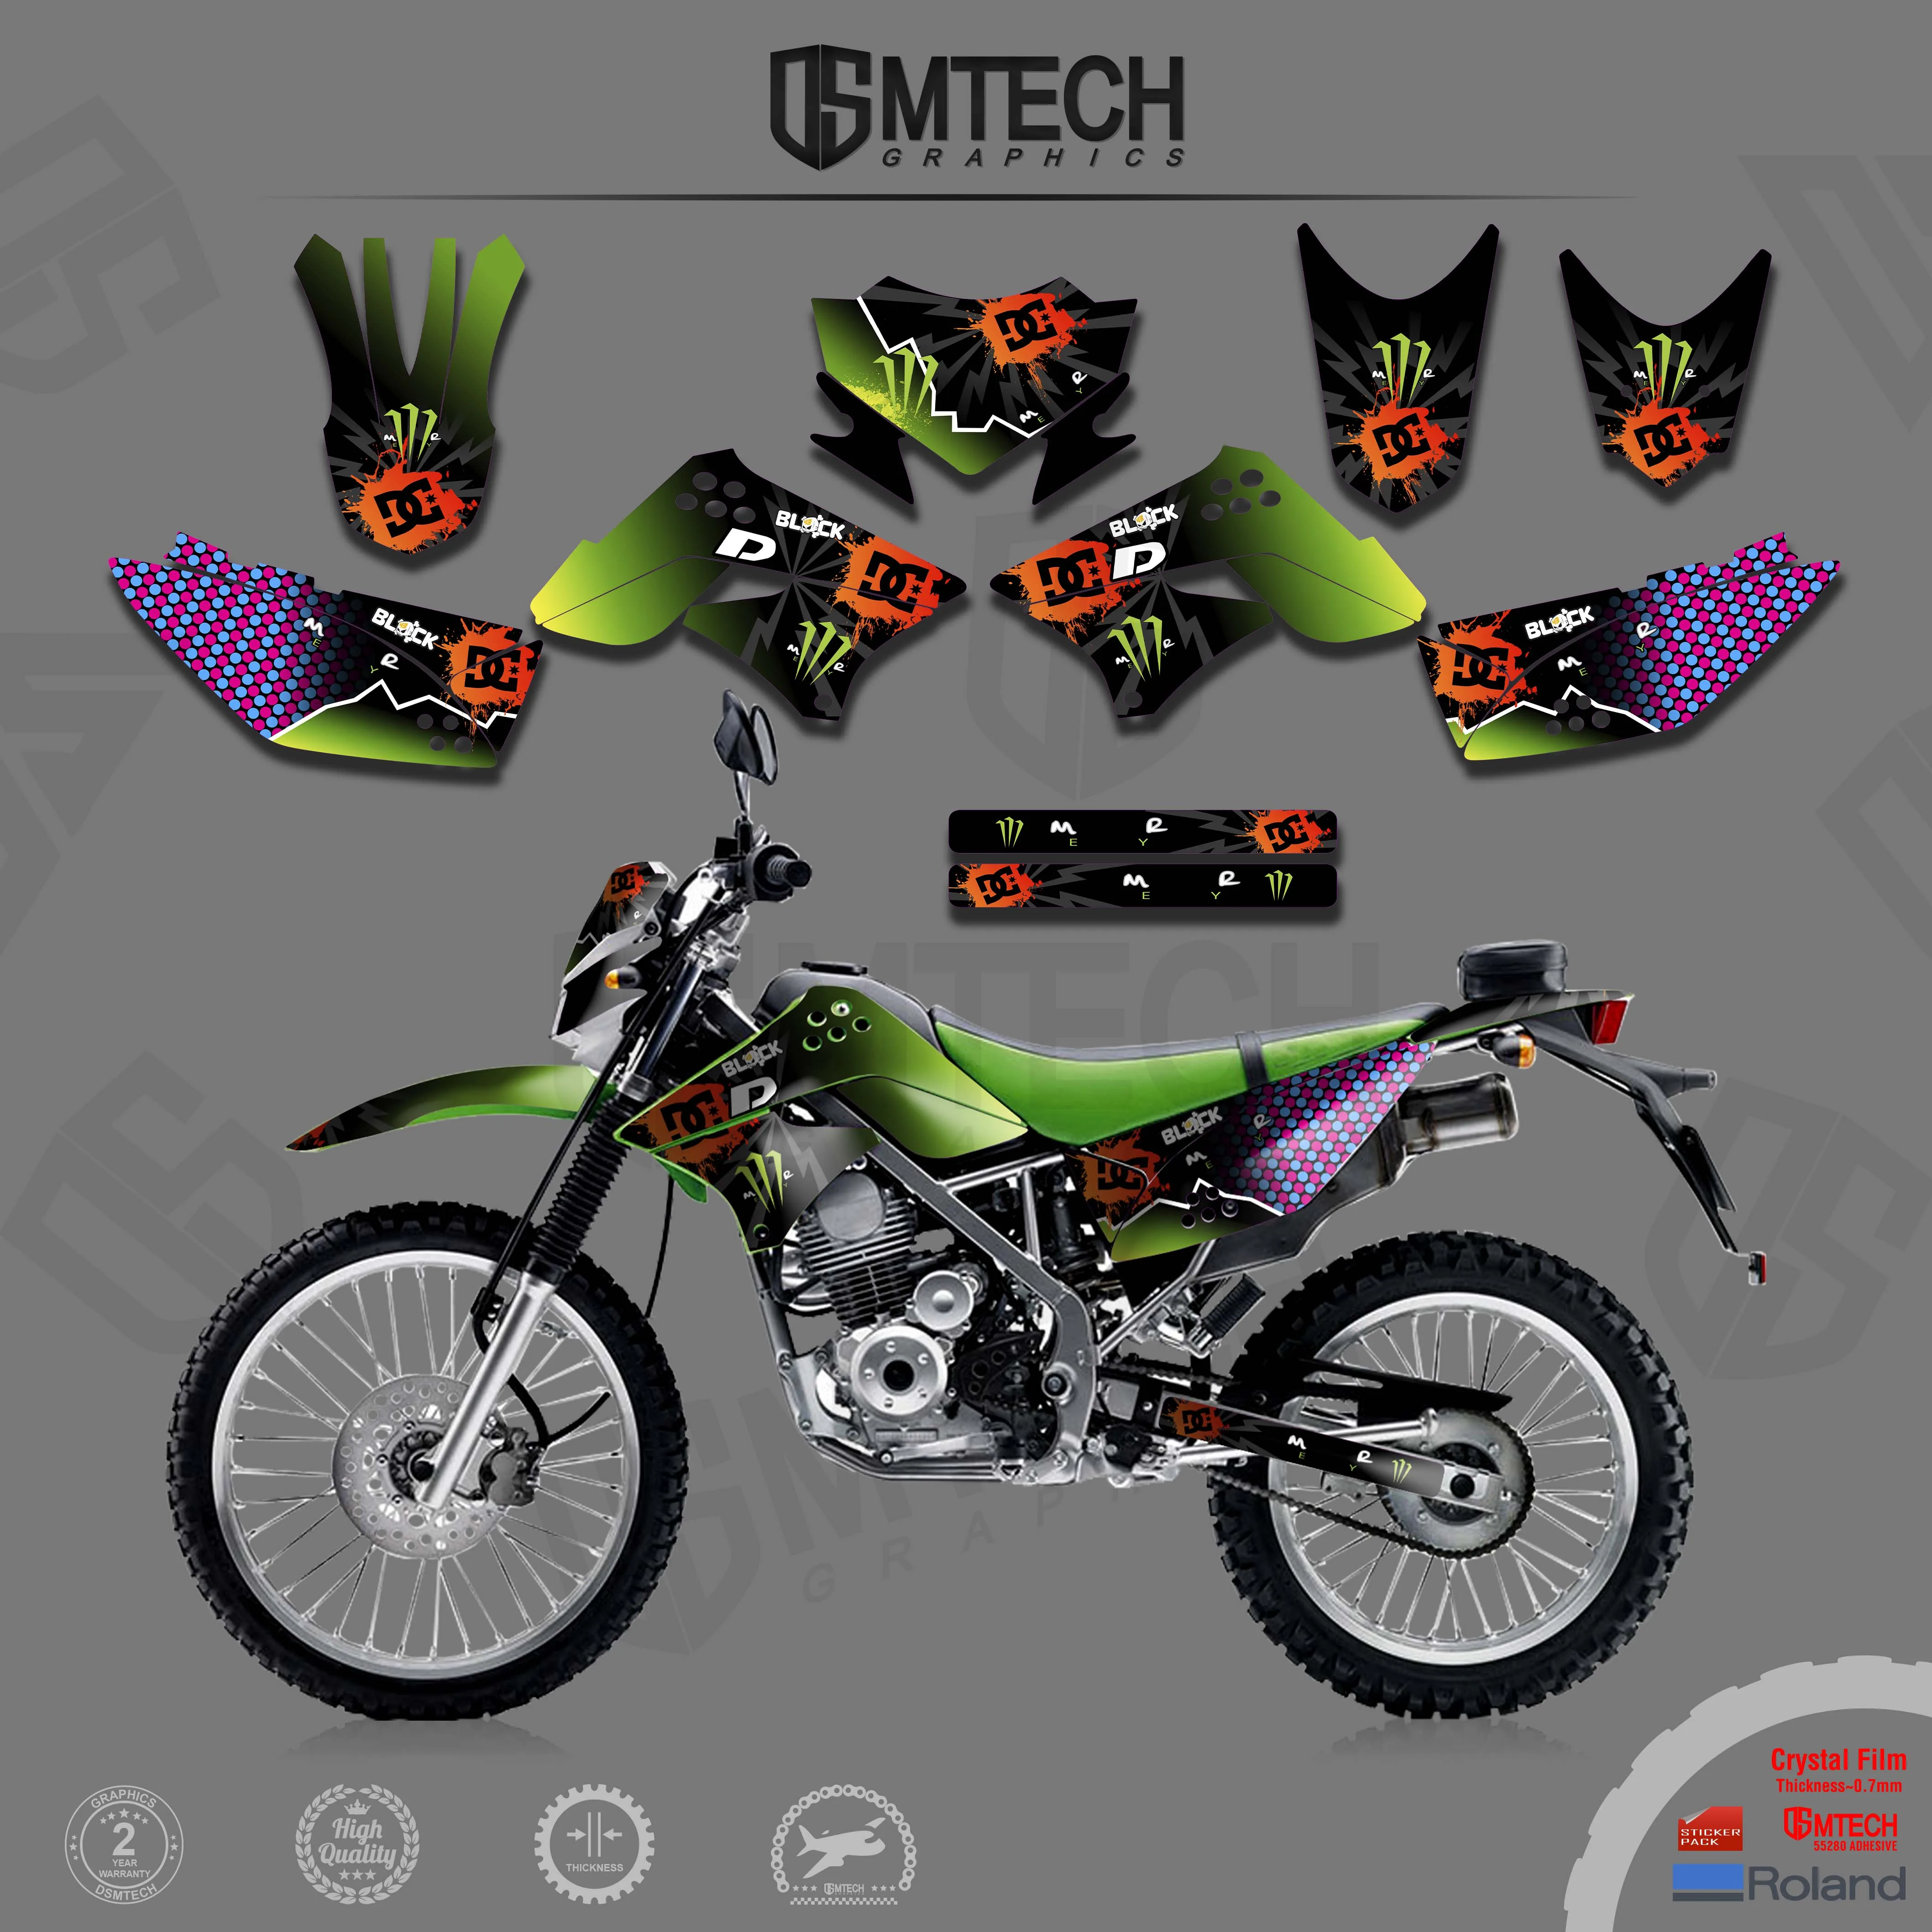 DSMTECH Motorcycle Decal Stickers Graphics Kit For KAWASAKI 2013 2014 2015 KLX125-150 15-13